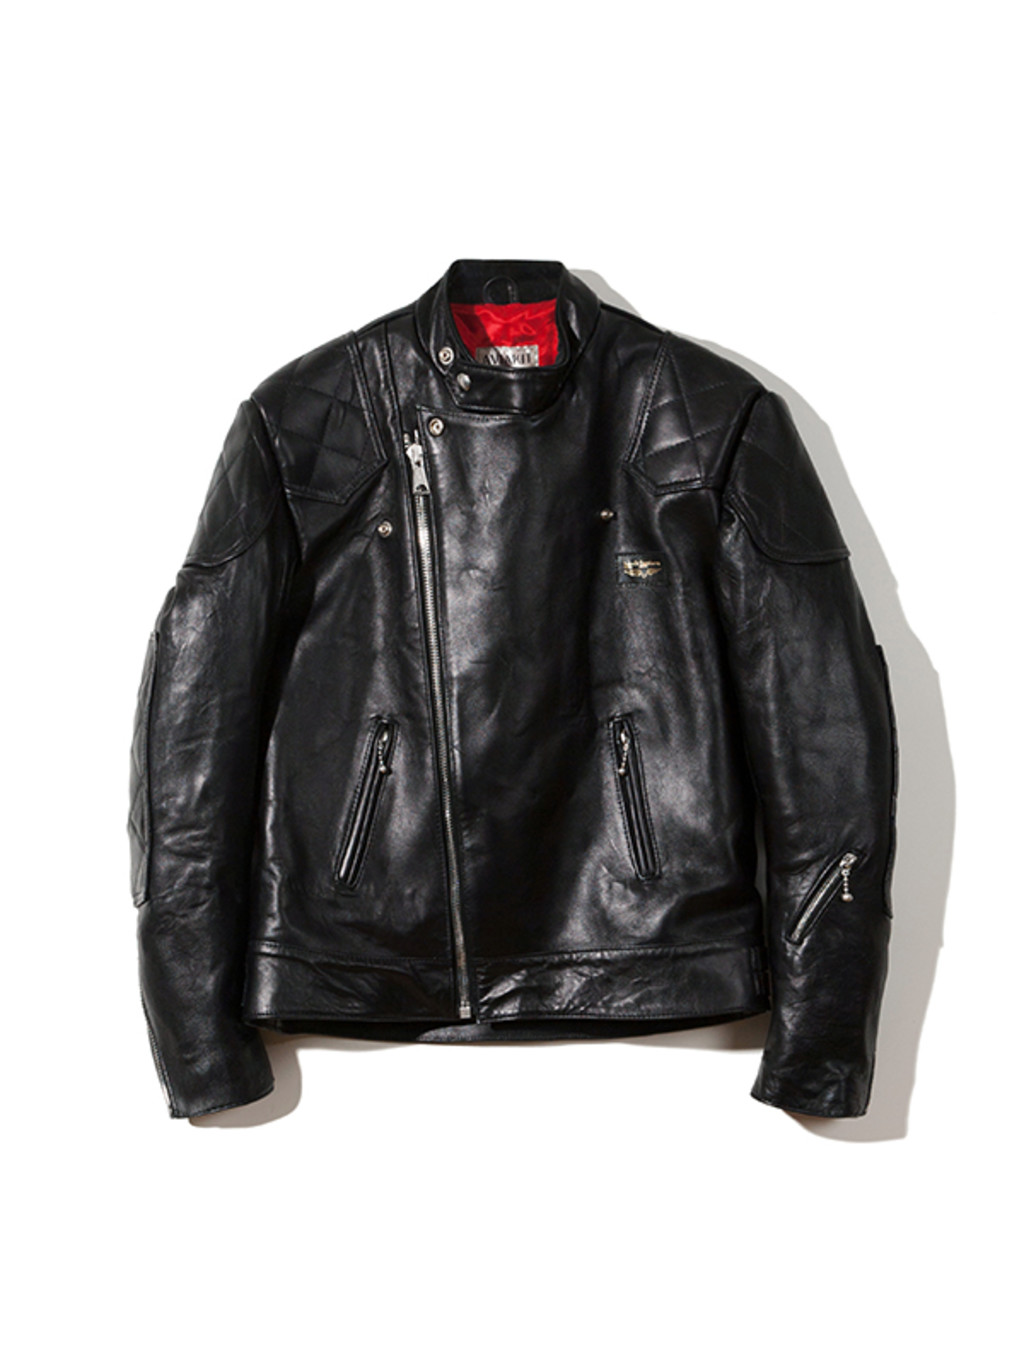 Lewis Leathers - 440 Twin Track Bronx jacket, twin front